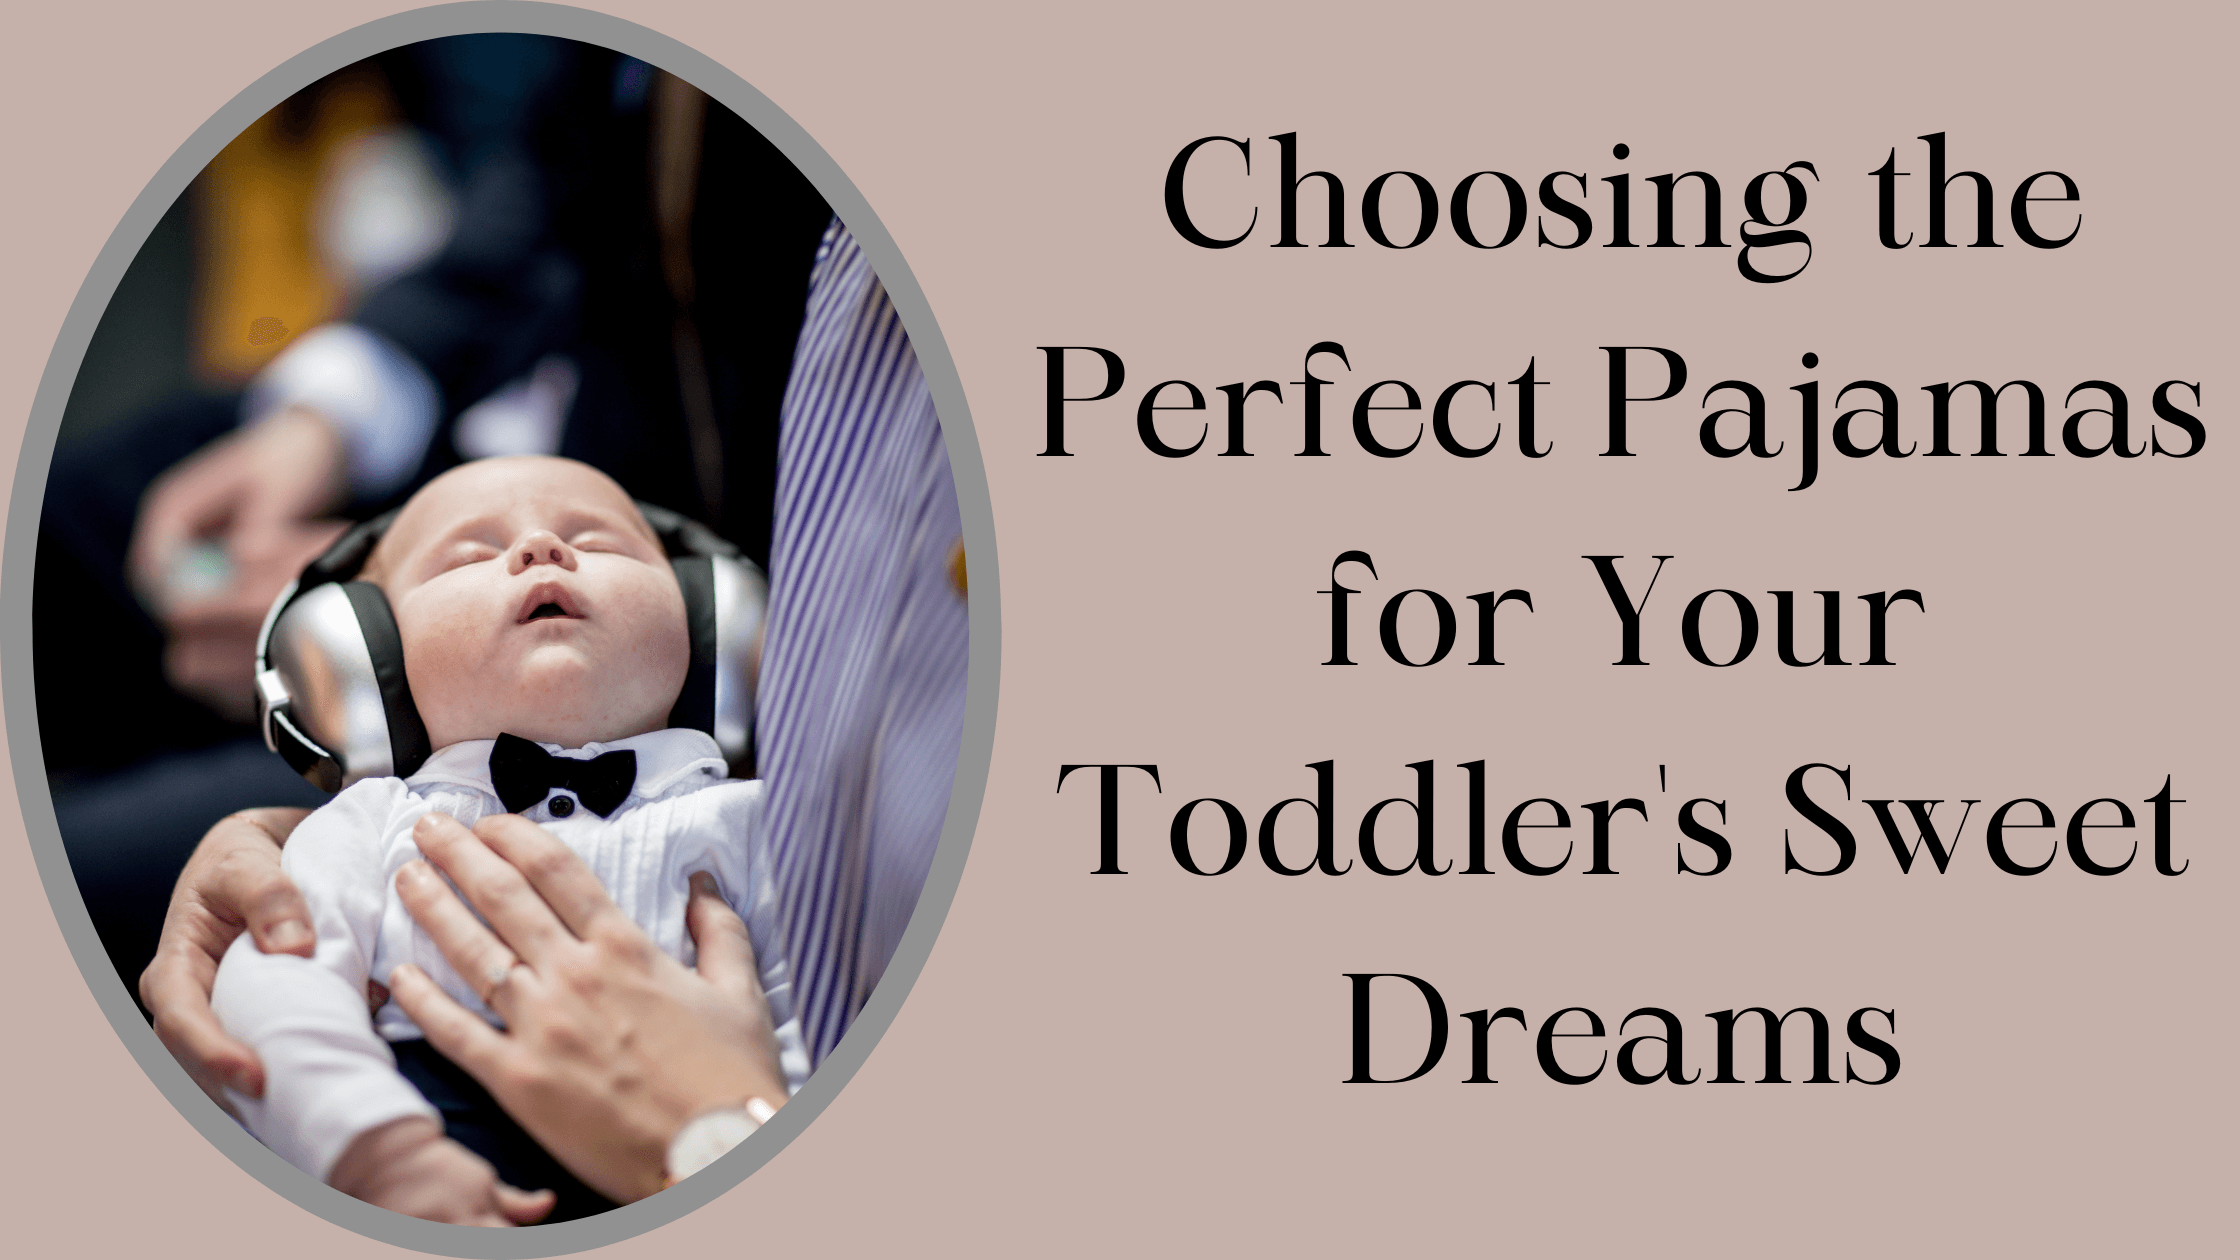 how to dress toddler for sleep